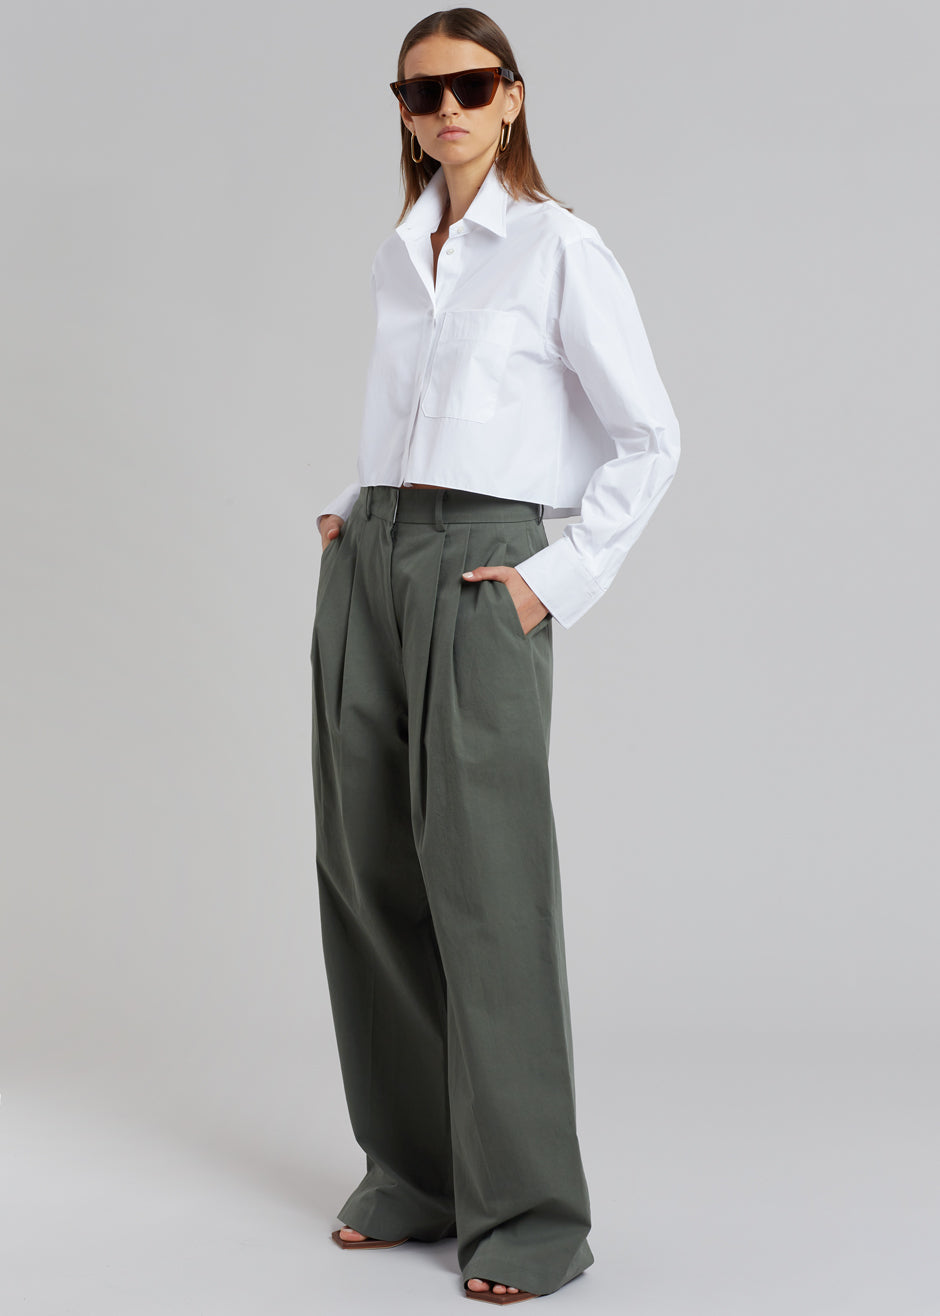 Tansy Cotton Pants - Olive - 1